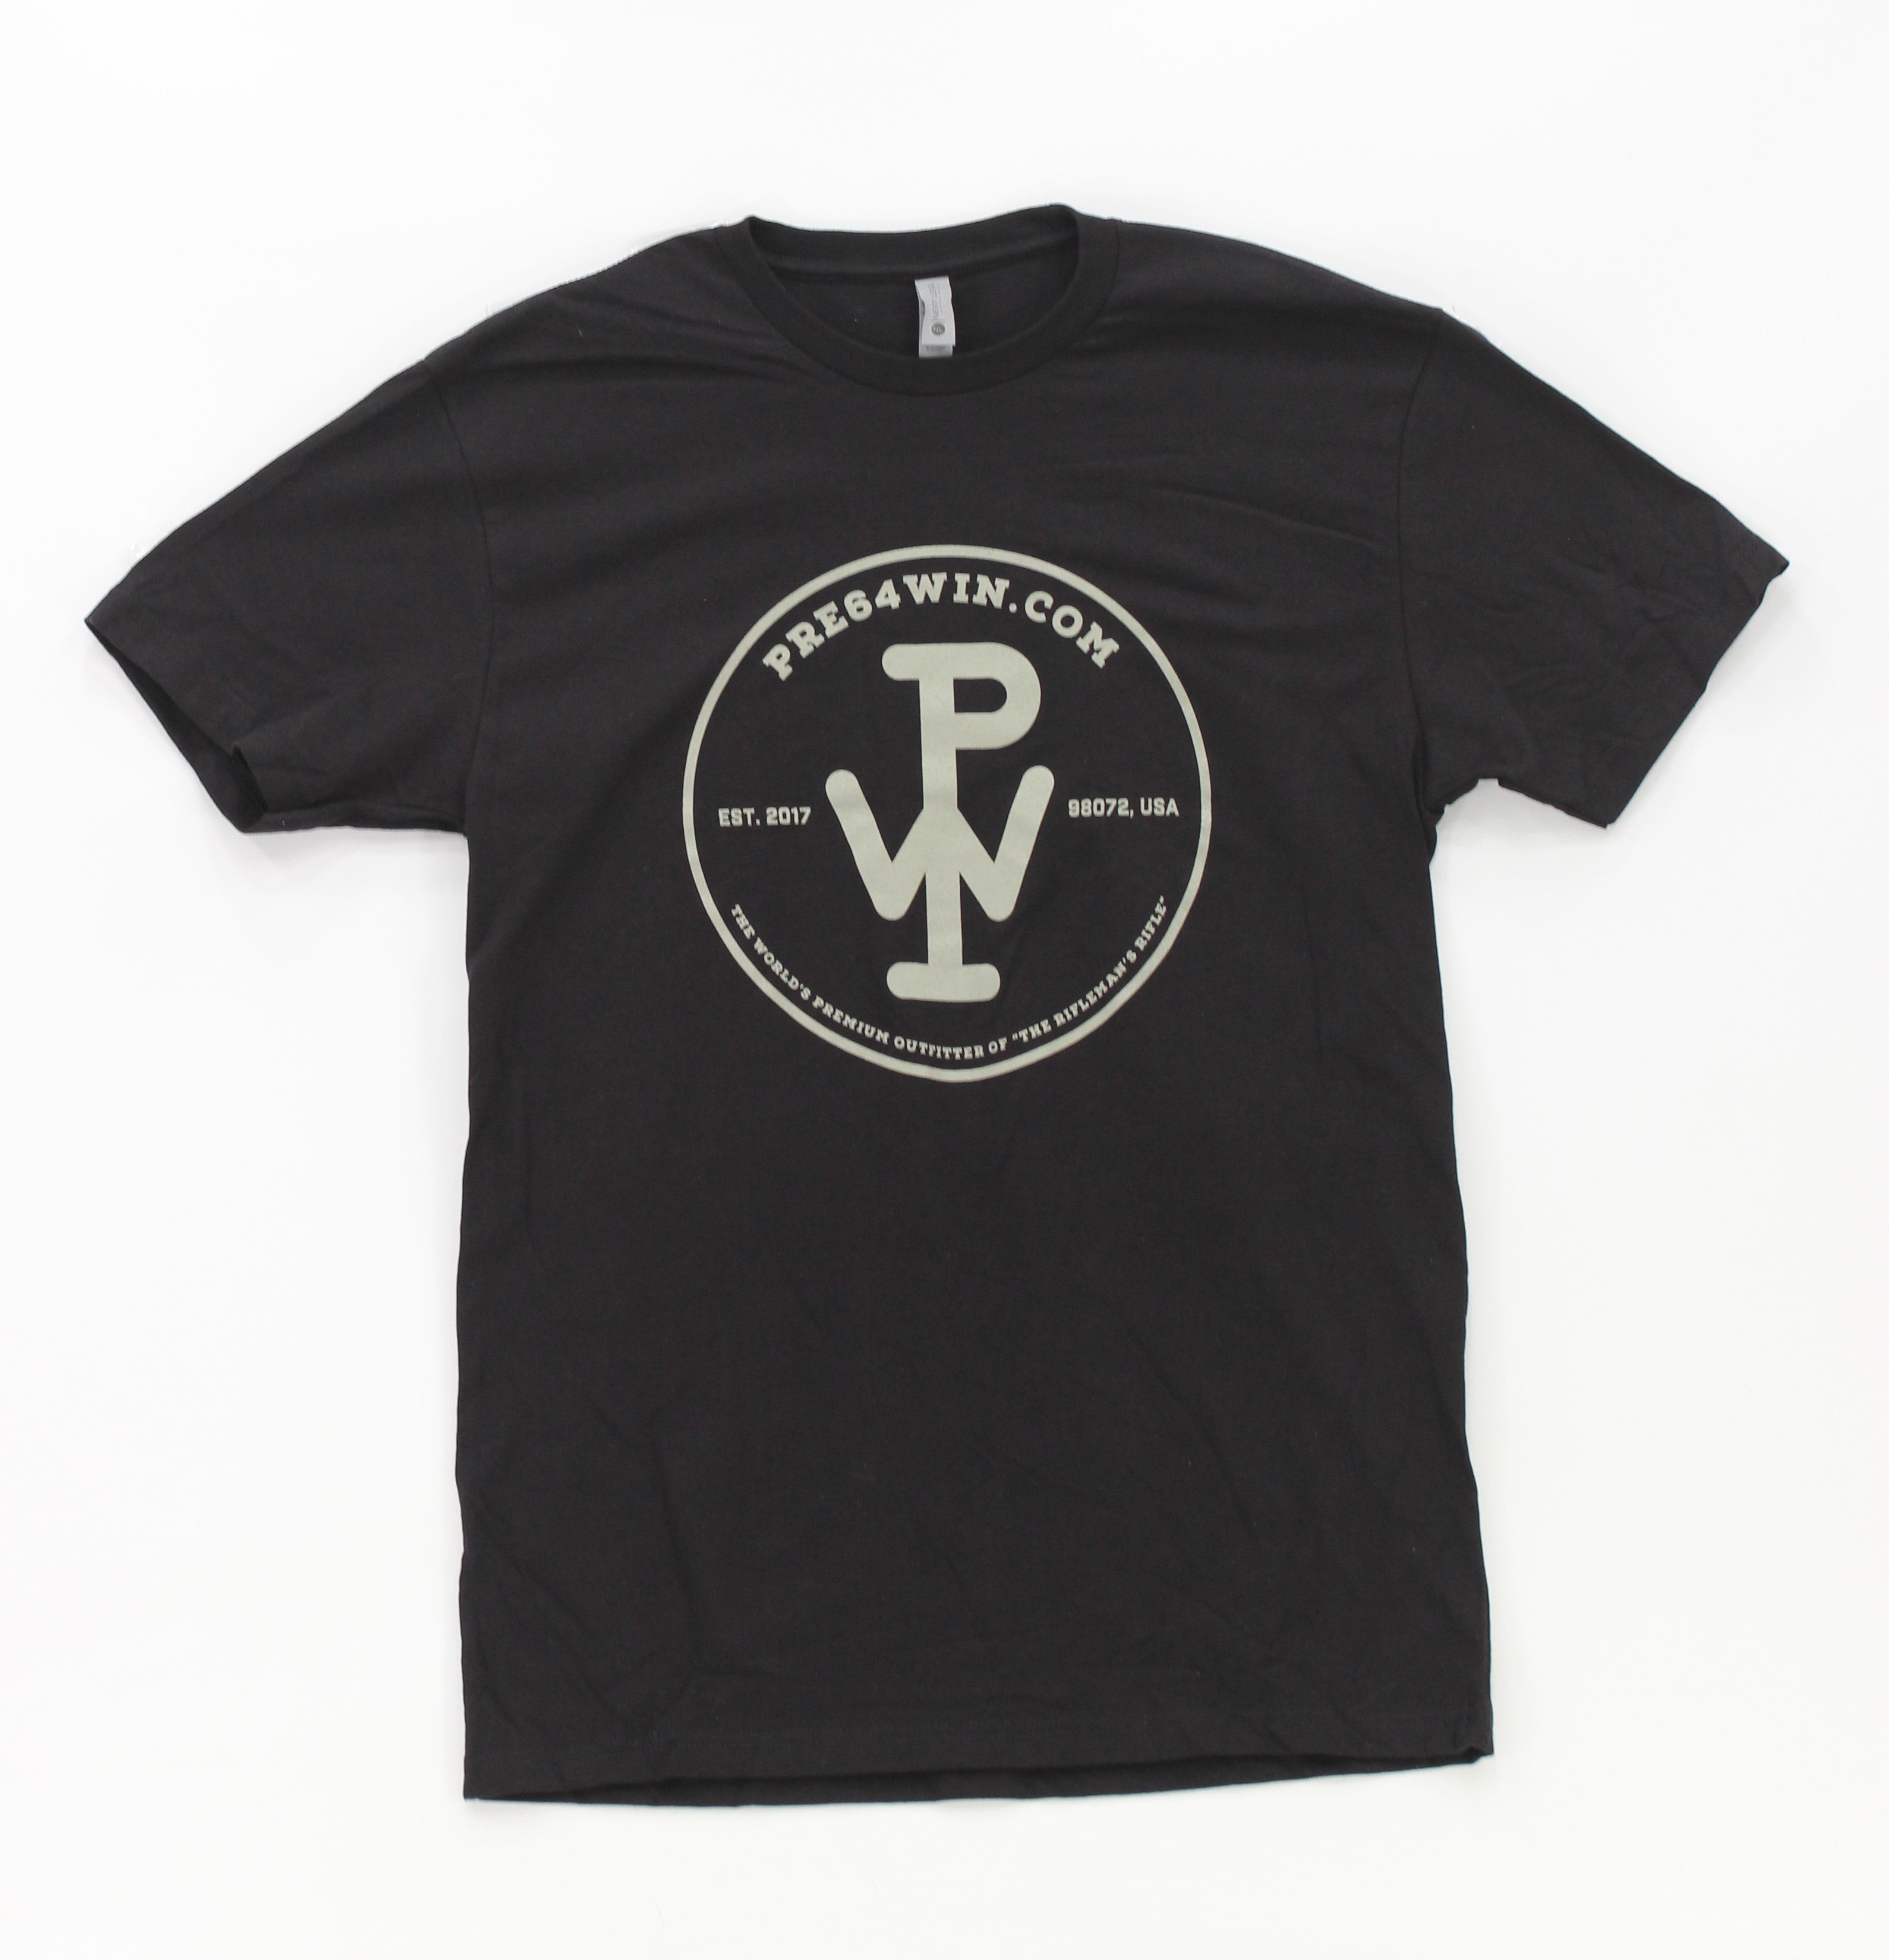 Black T-Shirt with Large Pre-64 Logo